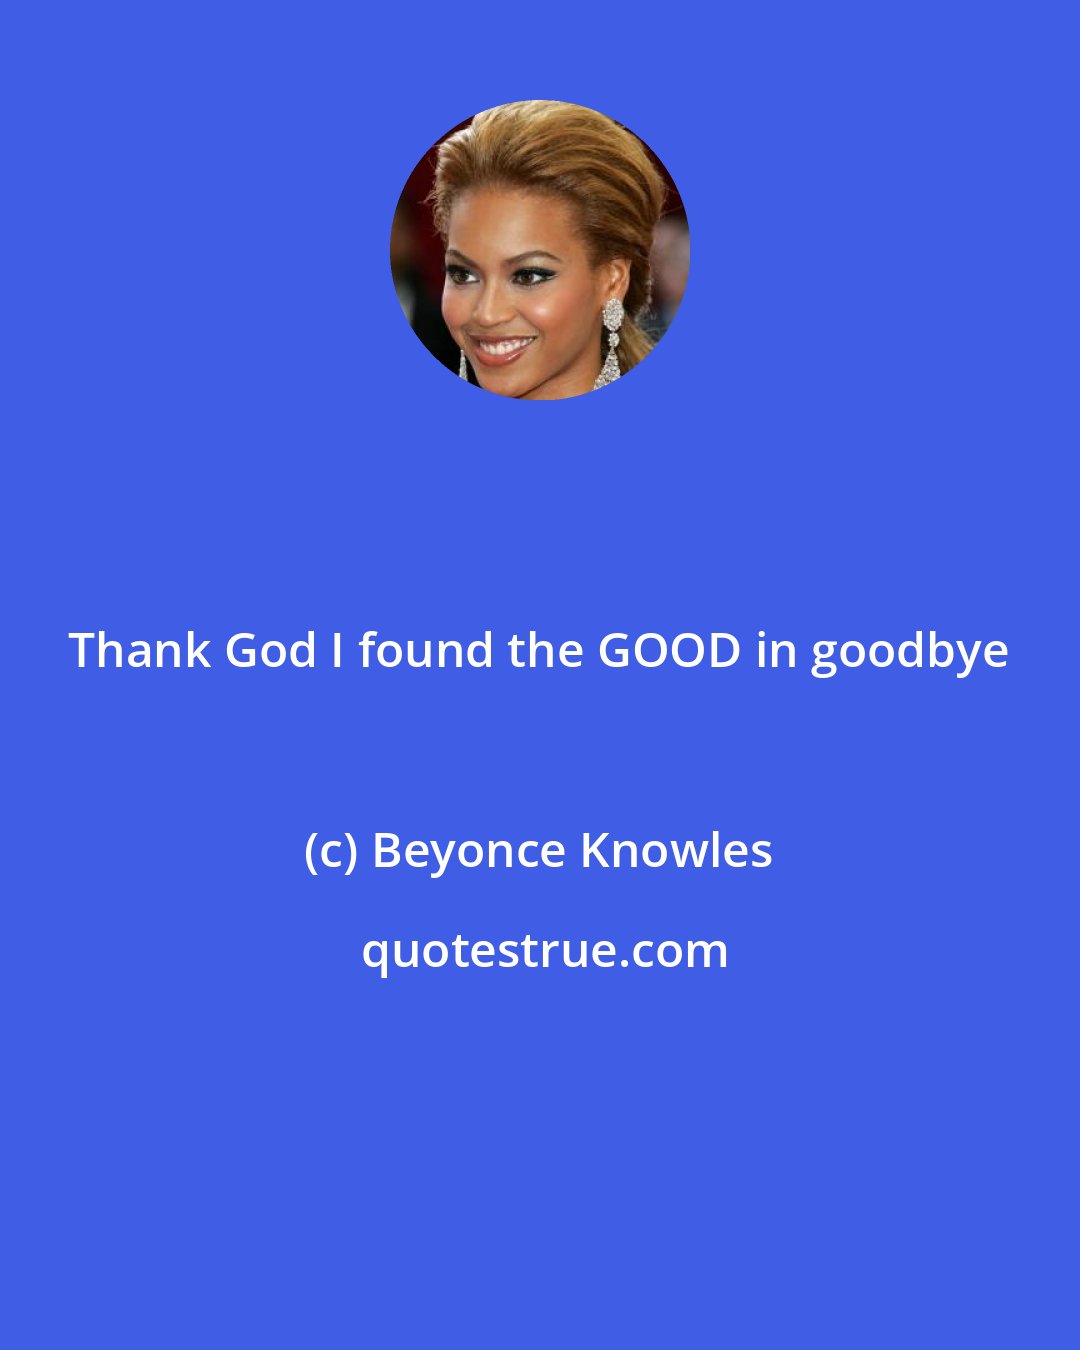 Beyonce Knowles: Thank God I found the GOOD in goodbye